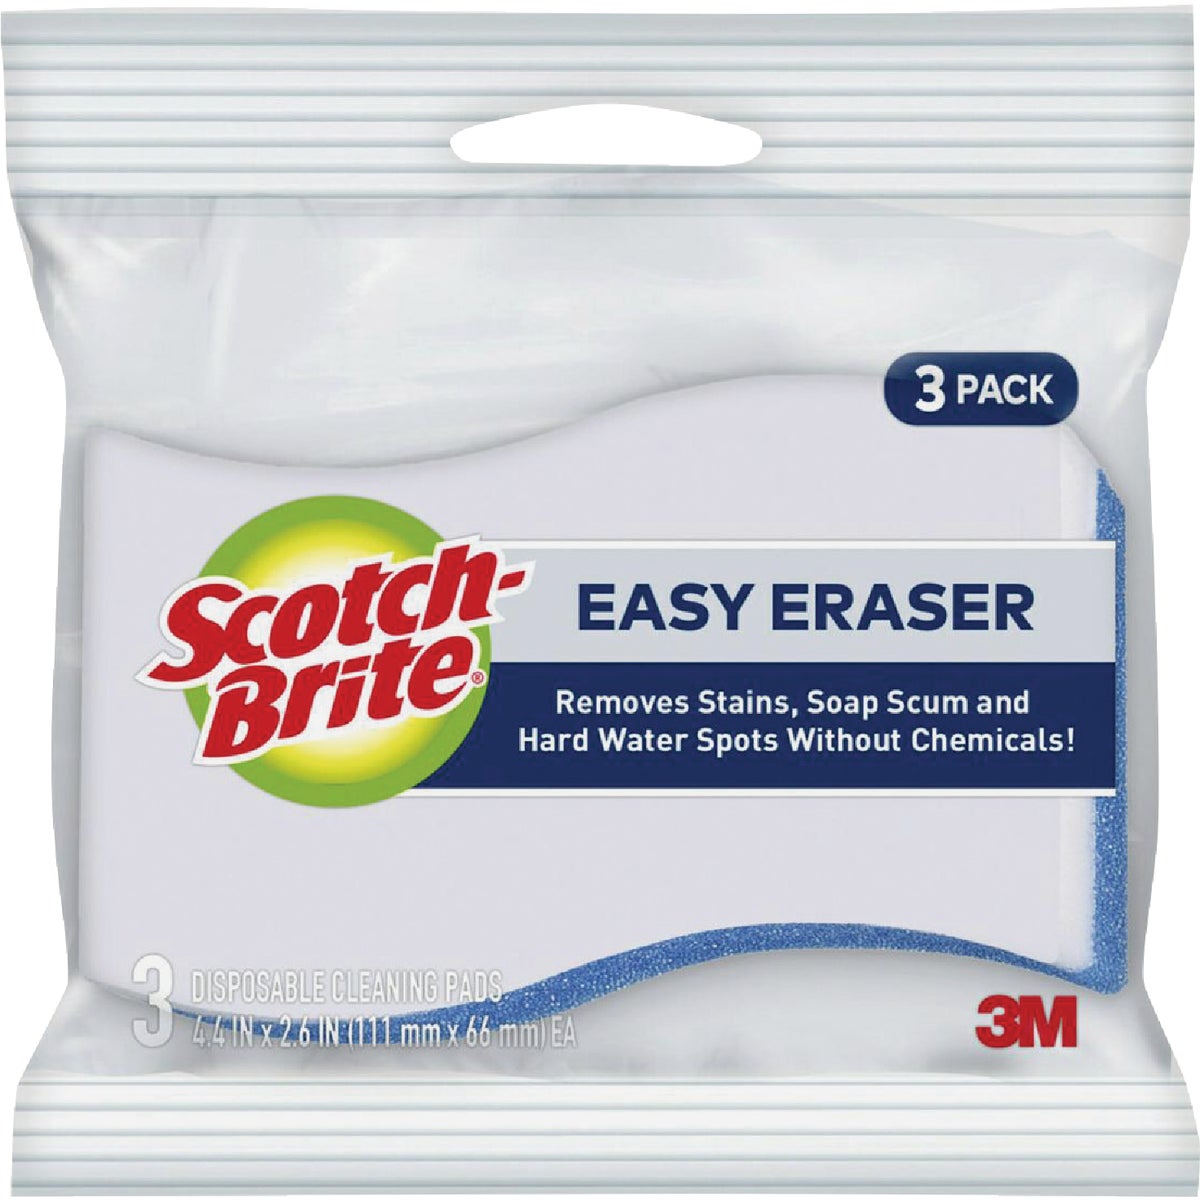 Item 600963, Easily remove stains, scuffs, and marks around the home with the Scotch-